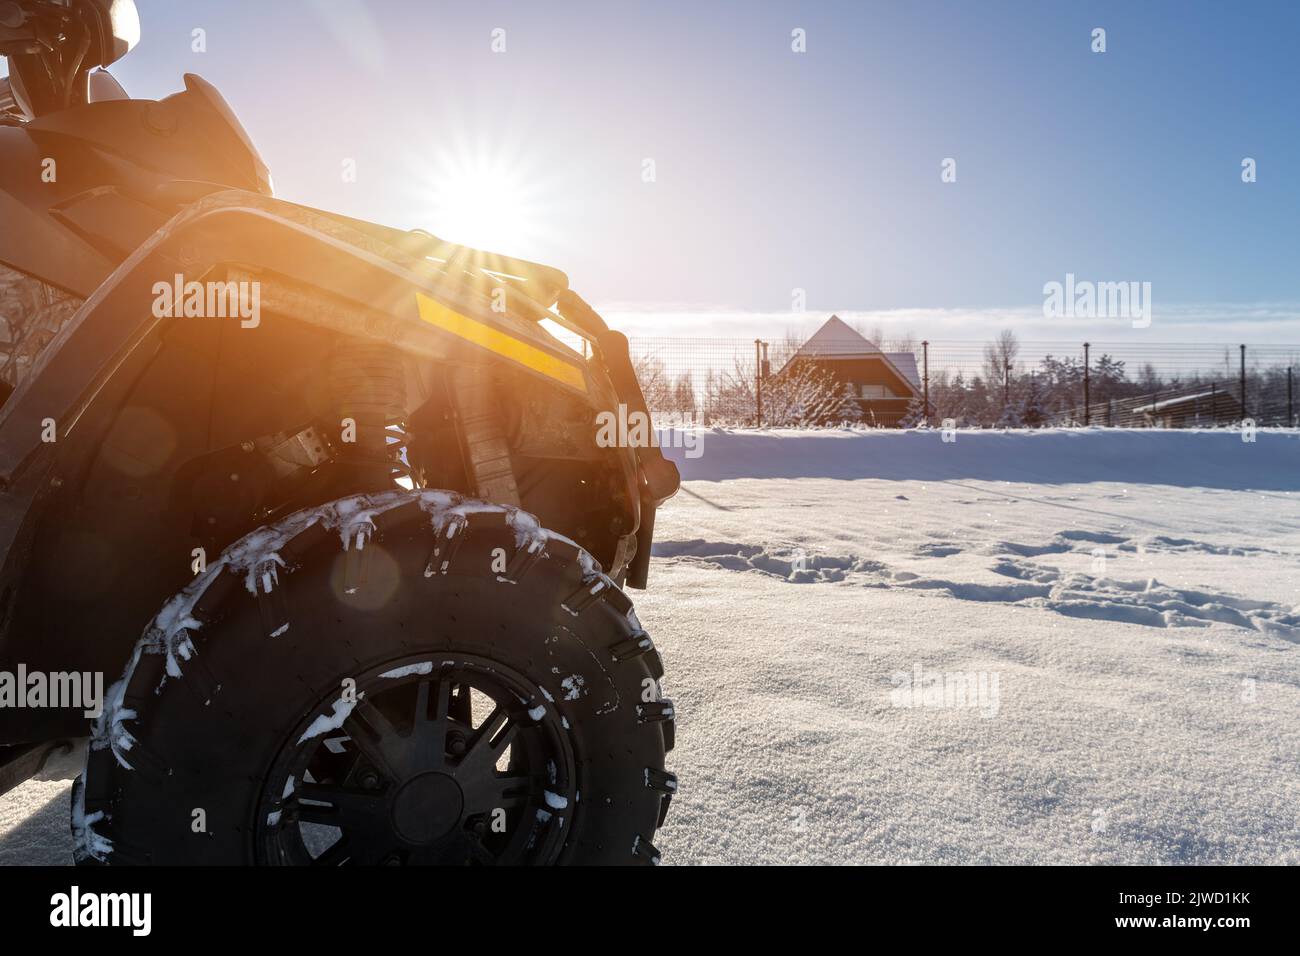 Side POV close-up detail view of quad bike offroad vehicle parked in snowdrift track on sunny snowy cold winter morning against clear blue sky. ATV Stock Photo